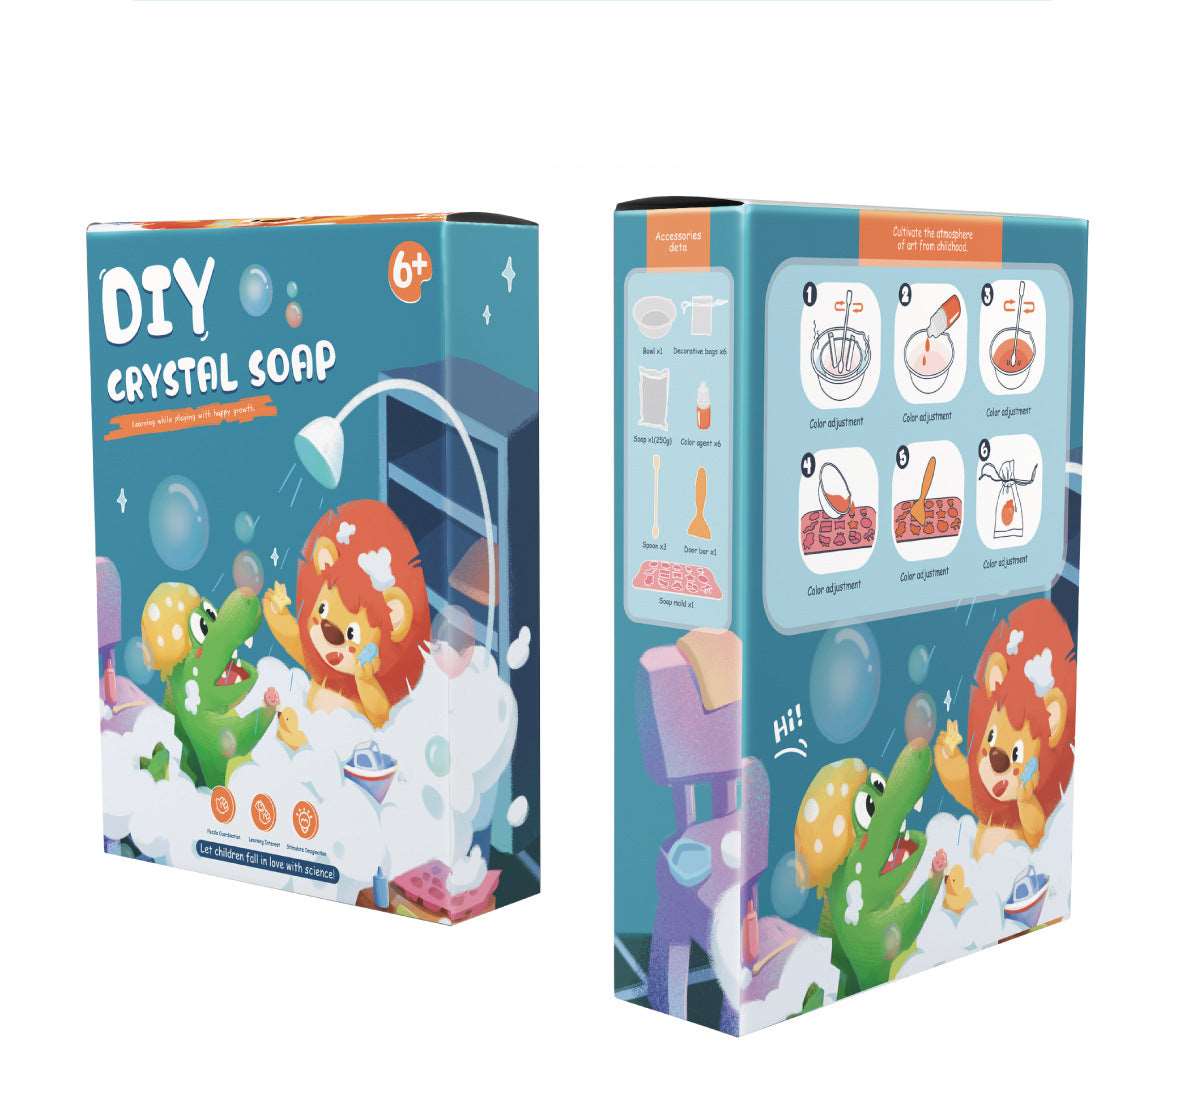 DIY Soap kit, Cartoon, Dinosaur, Transportation and Sea animals shapes mould. Art & Craft kit for kids. Perfect Party giveaways.